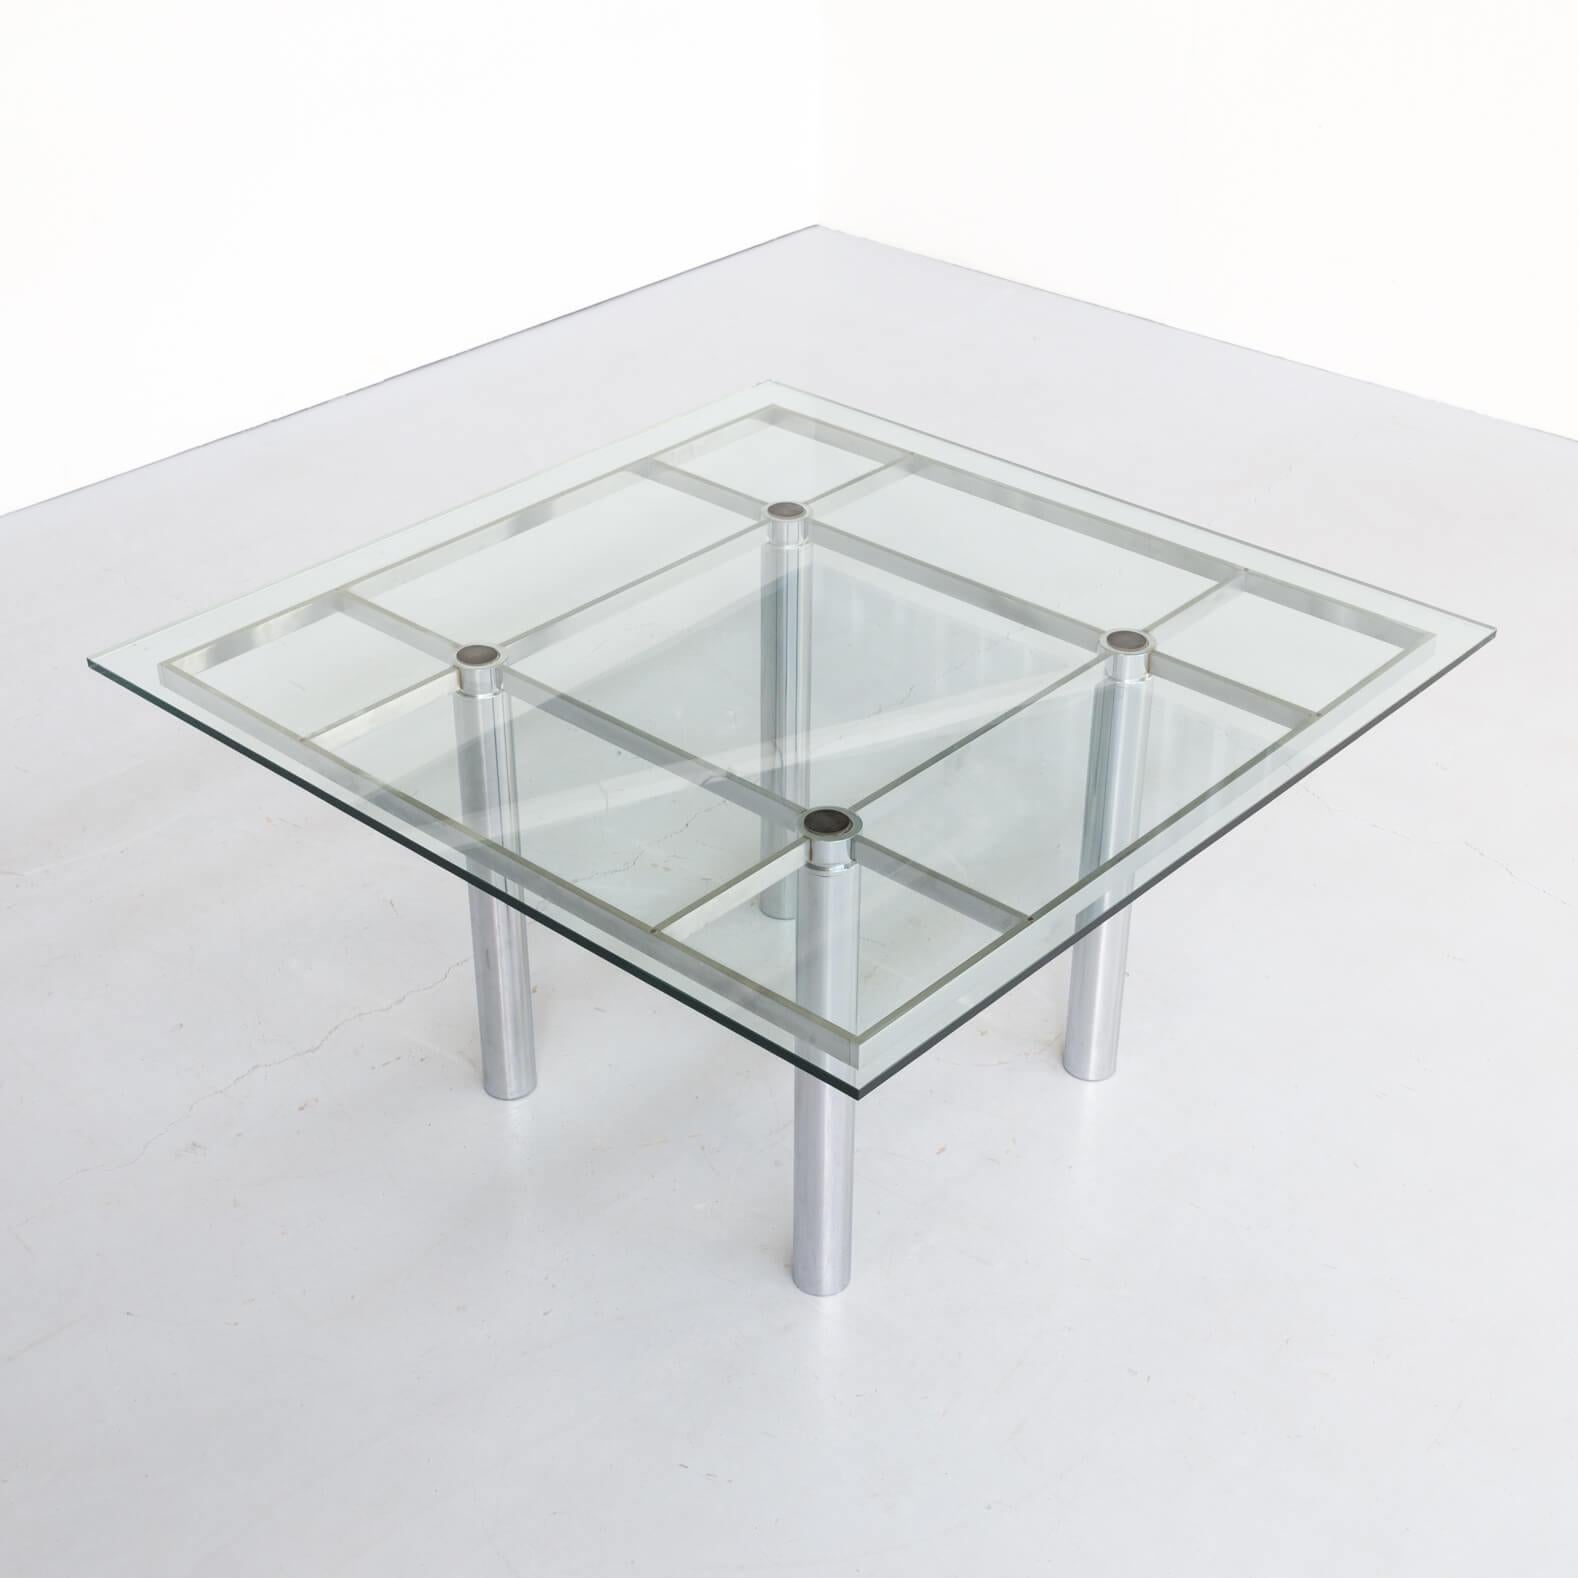 Beautiful square Andre glass and chromed steel design dining table for Gavina. Designed by the pair Tobia and Afra Scarpa in the 1970s. Good condition, small chip from the corner of the glass, consistent with age and use.